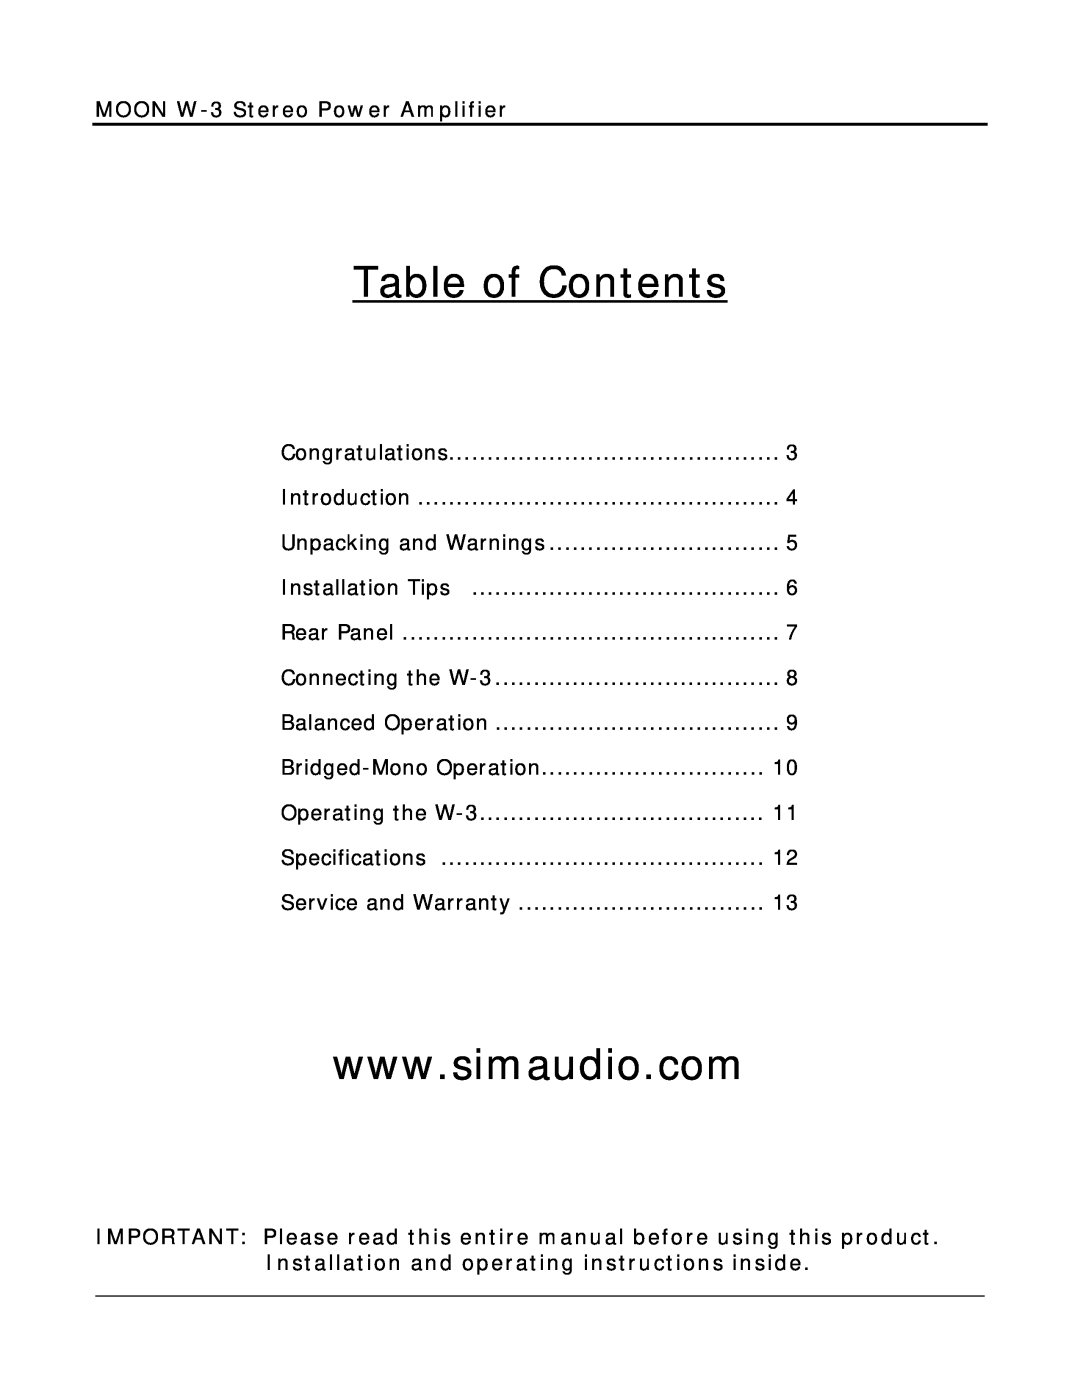 Simaudio owner manual Table of Contents, MOON W-3Stereo Power Amplifier 